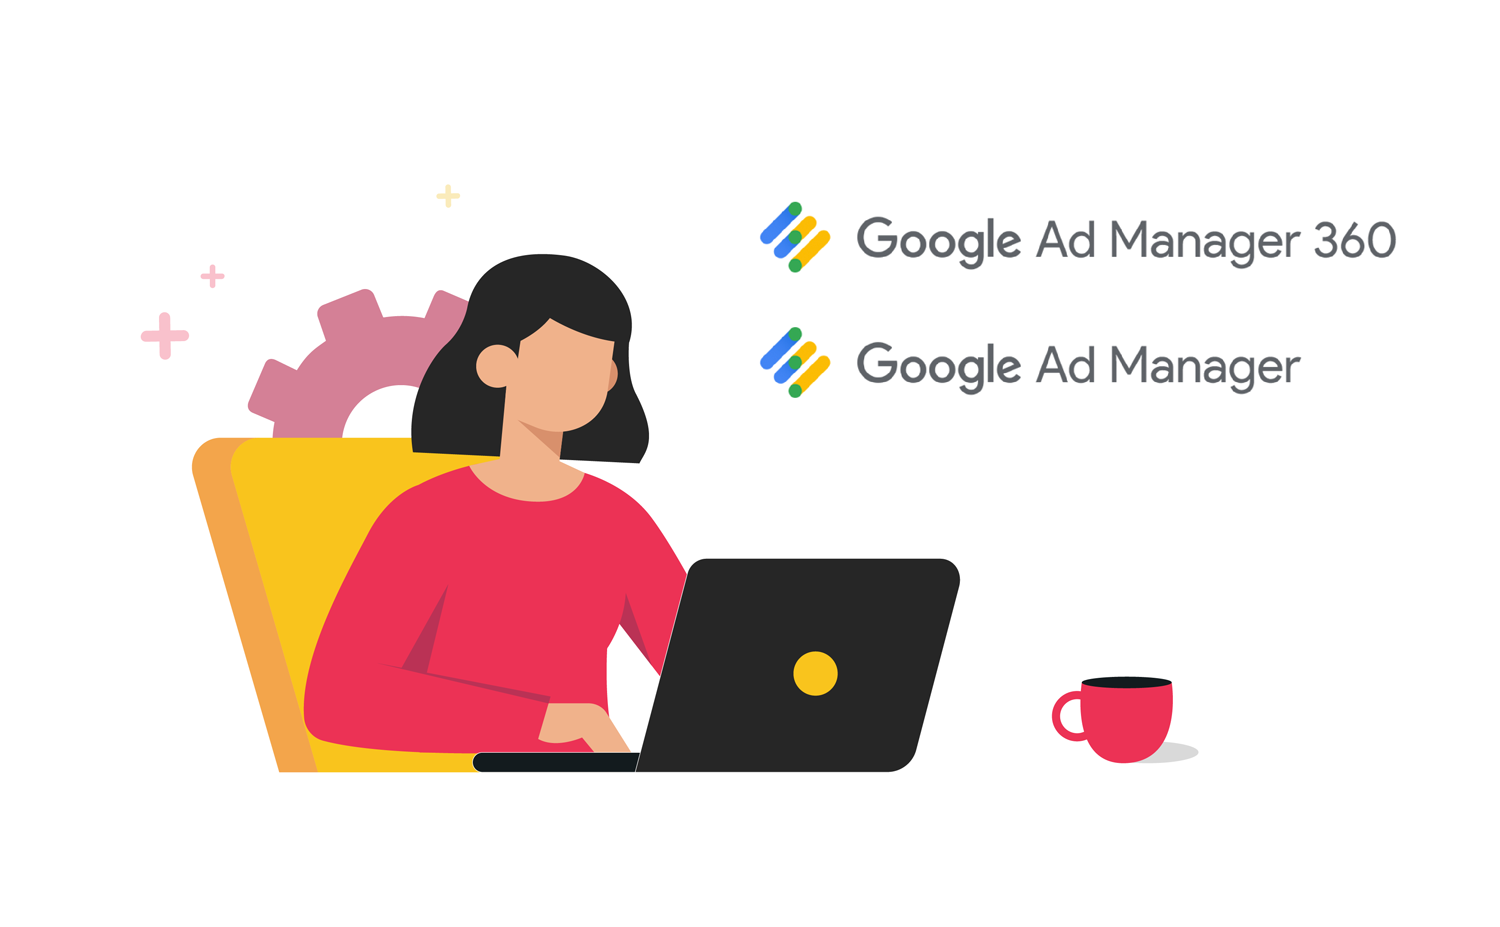 Google Ad Manager 360, have you heard of that?